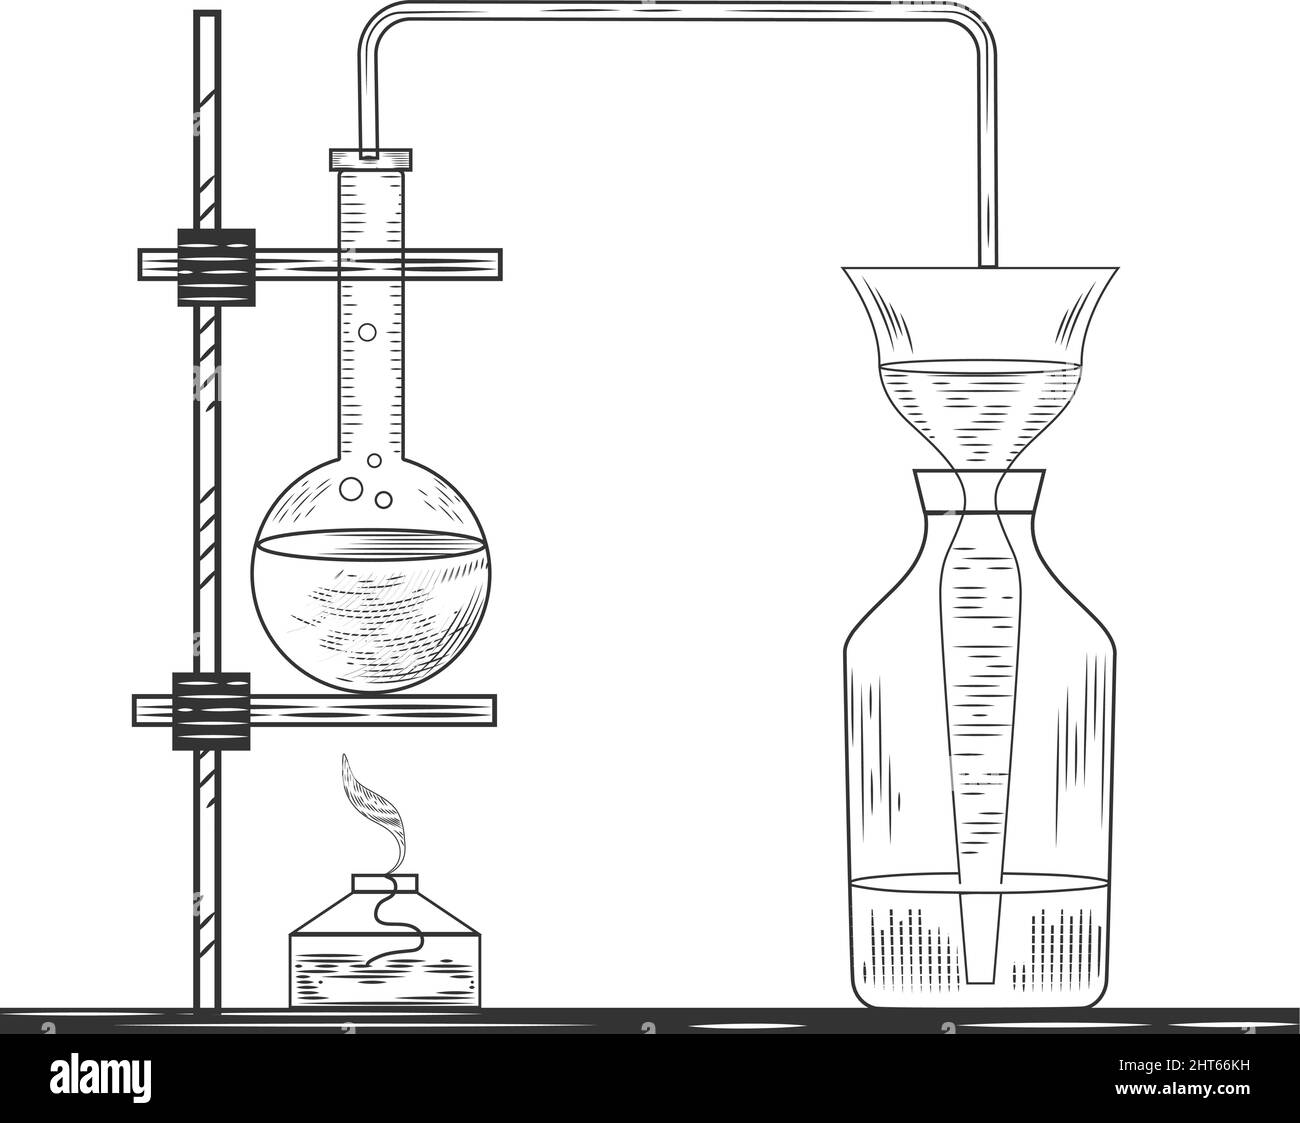 Vector pharmaceutical glass flasks, beakers and test tubes in old engraving style.Sketch of a physics or chemical laboratory experiment and equipment. Stock Vector